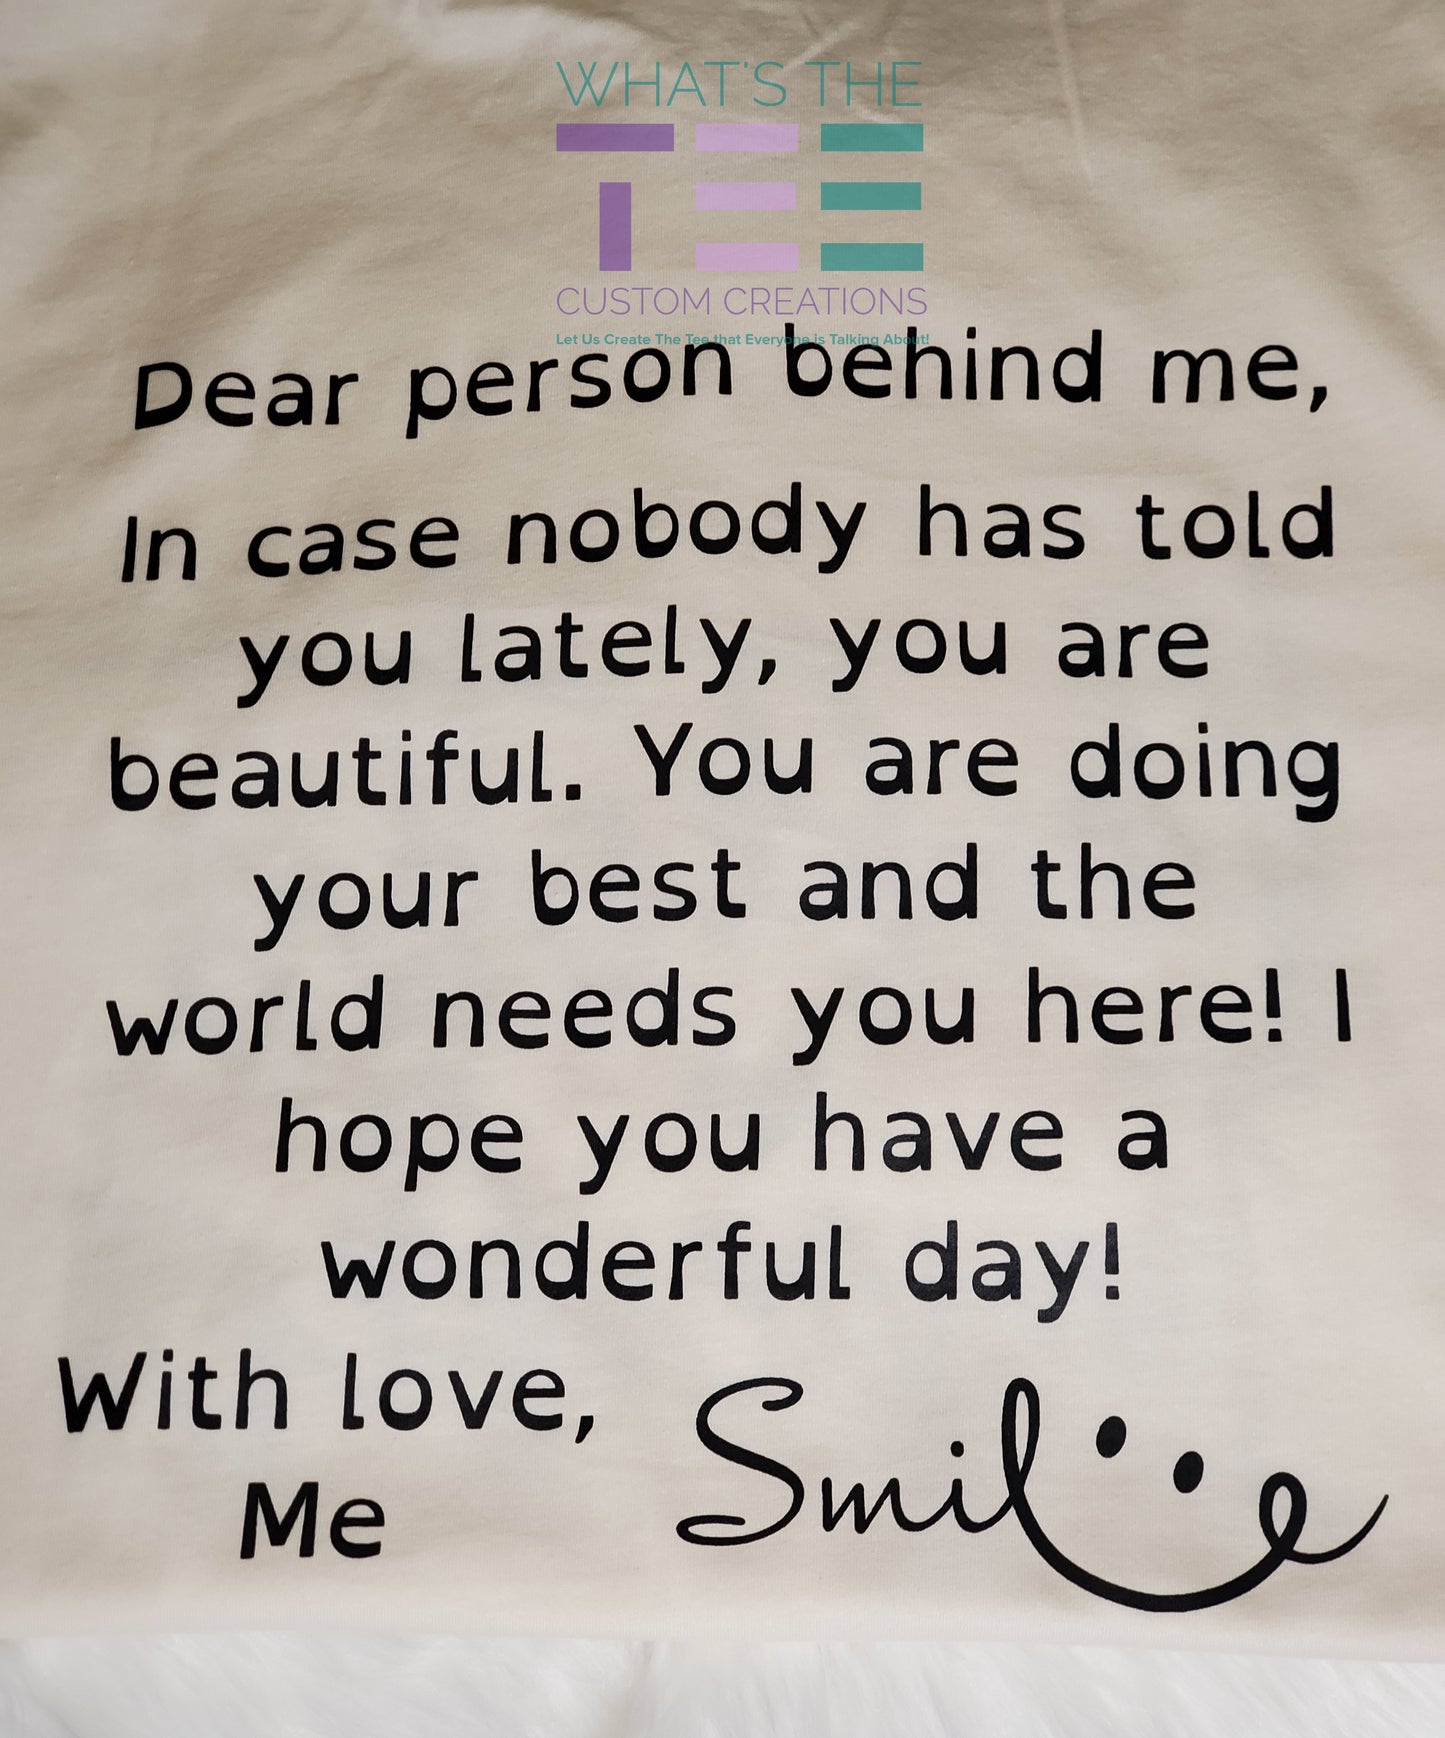 Inspirational tee to make the person behind you smile